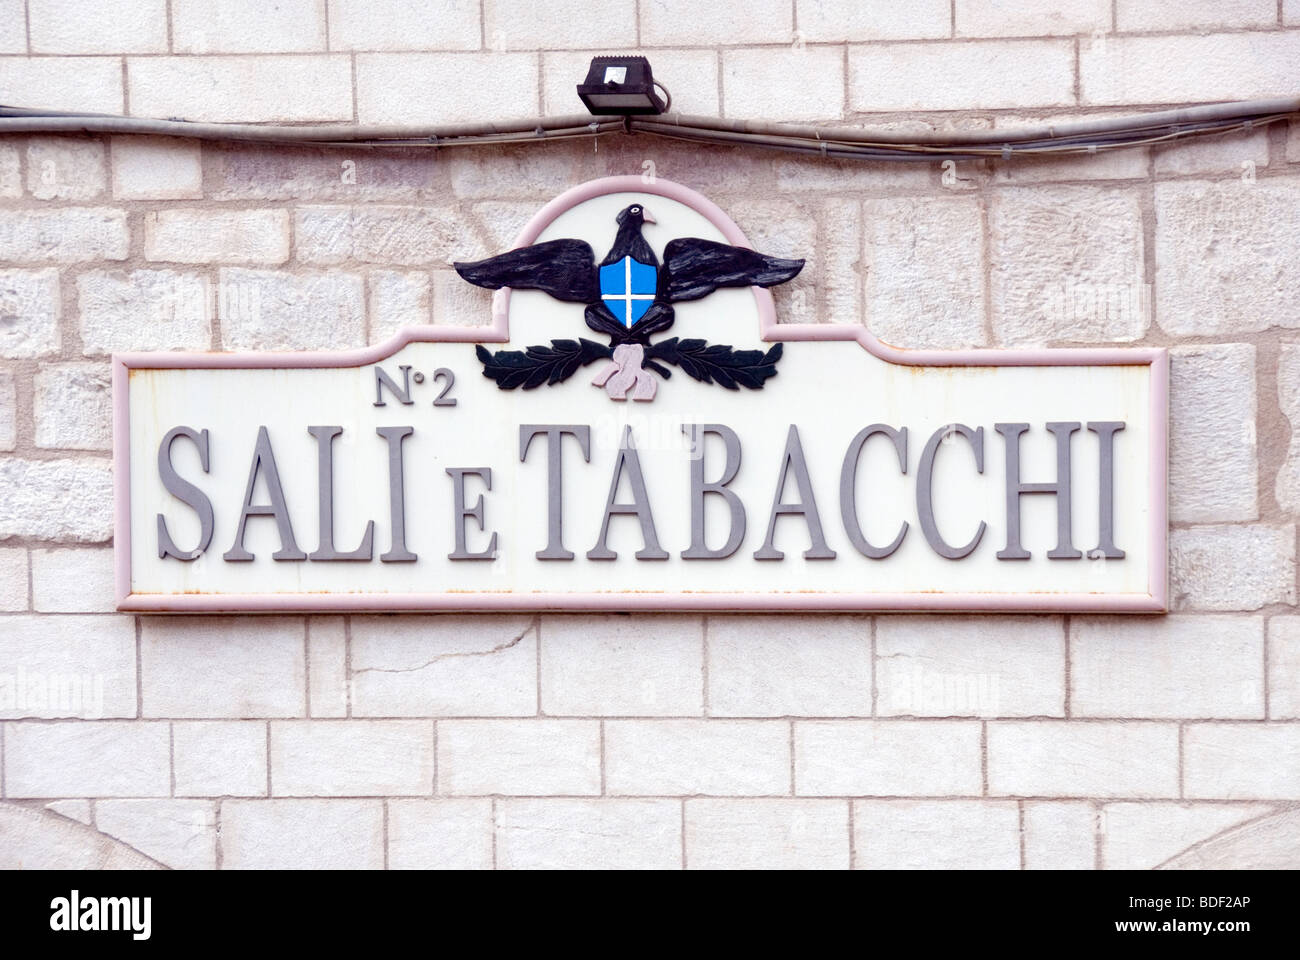 Sign for selling Salt and Tobacco (Sale e Tabacchi) which must be sold under license in Italy Stock Photo